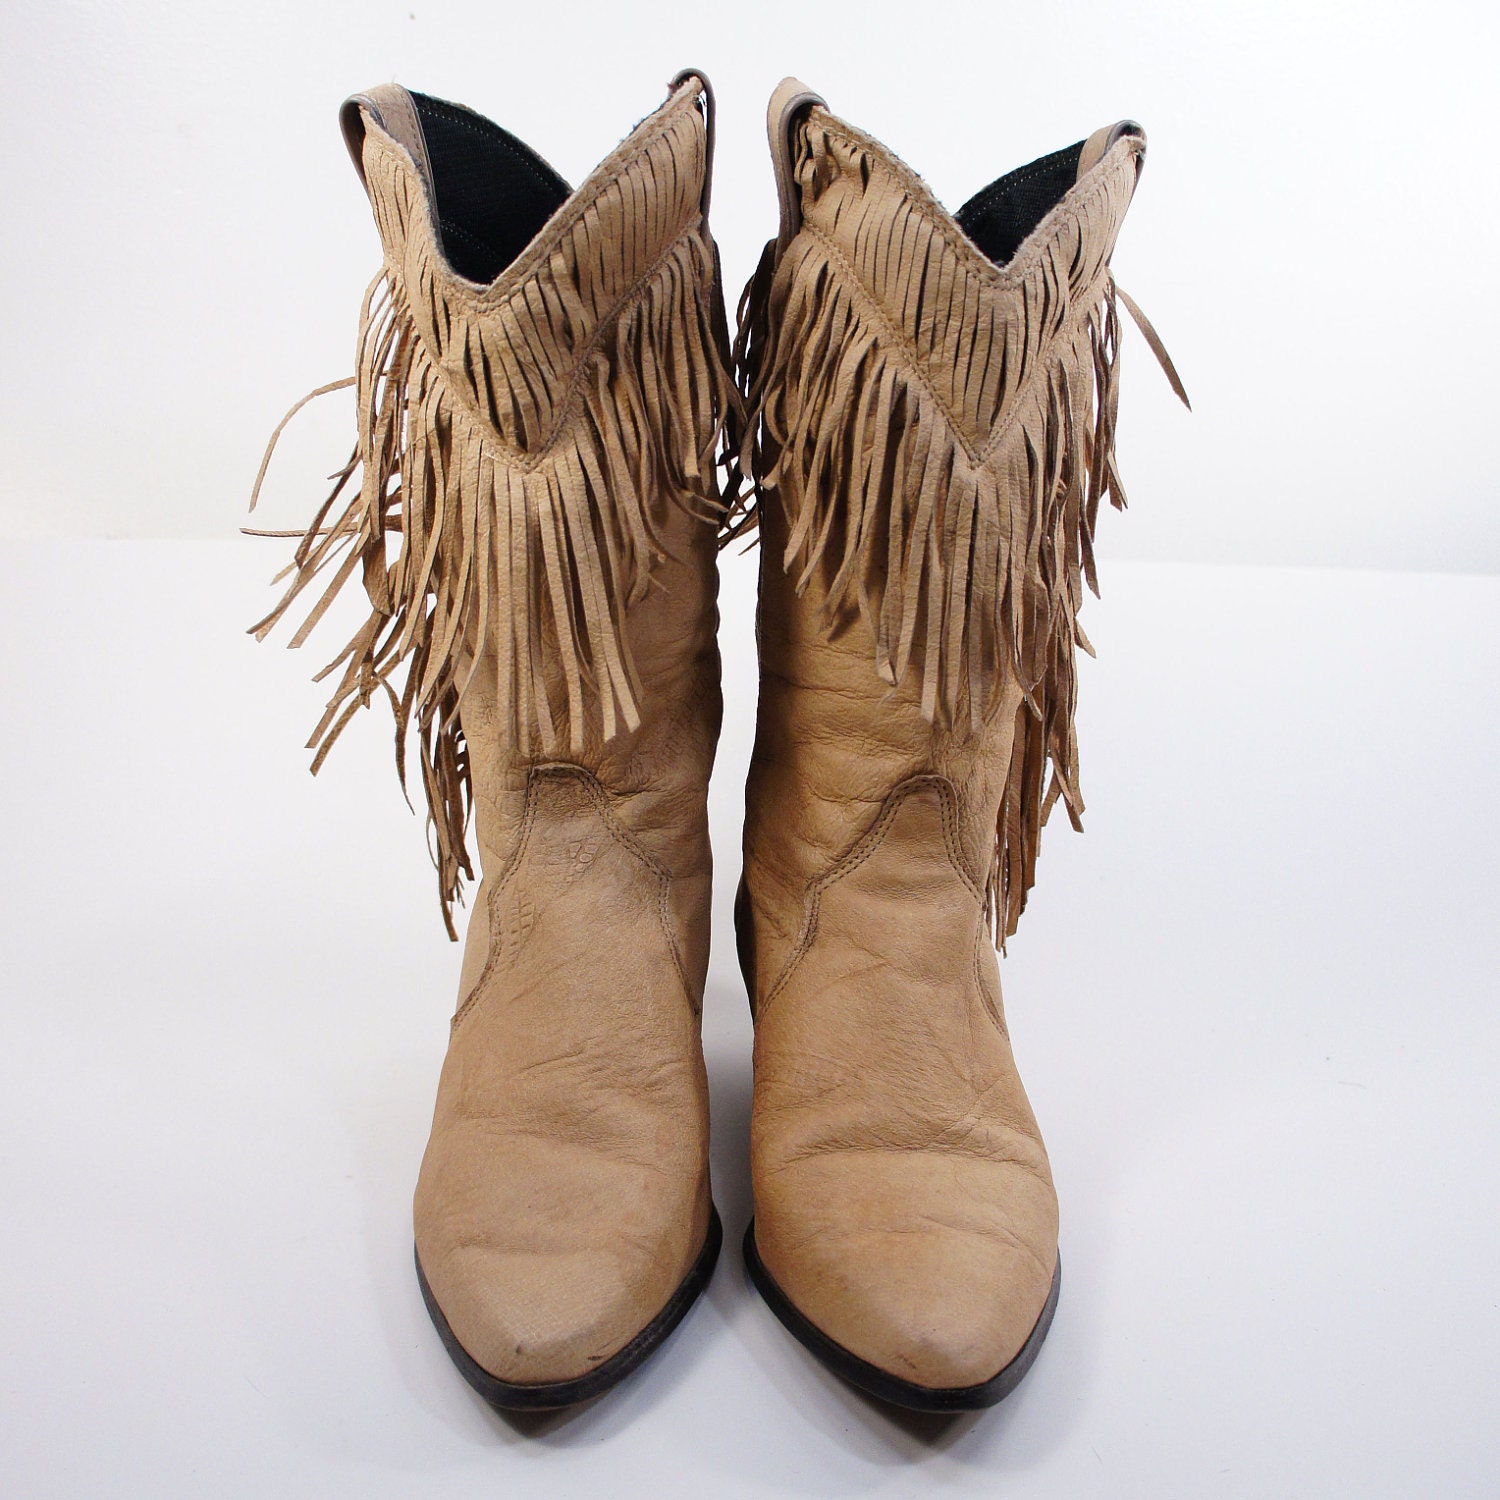 Women's Fringe Cowboy Boots in Tanned Leather by Laredo